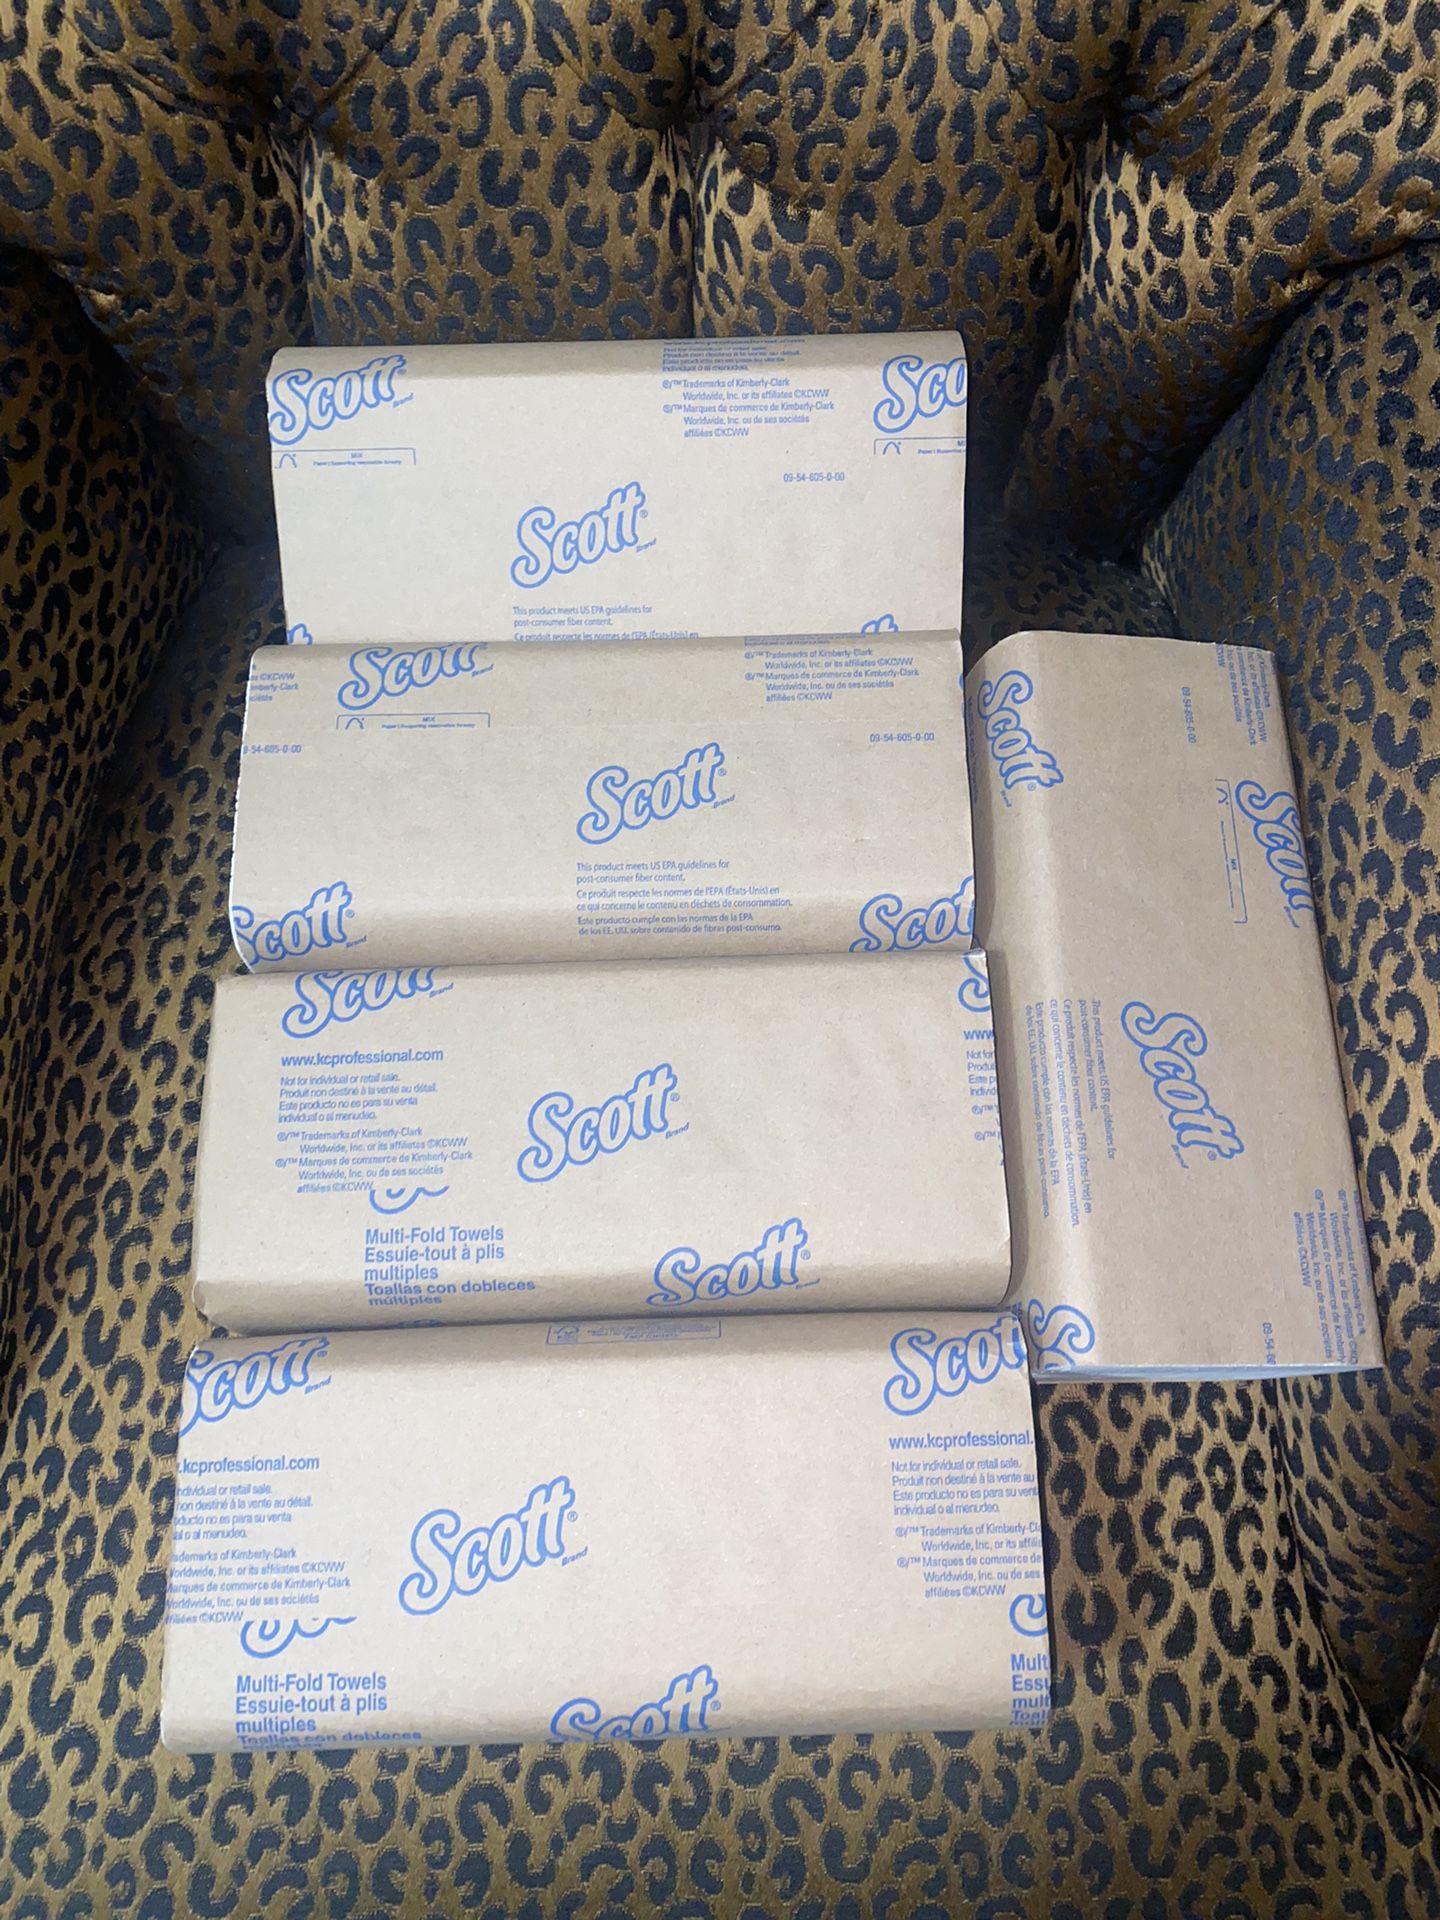 5🔥 Packs Of 250  Total Of 1,250 Scott Paper Towels All 5 Packs For $10 Firm On Price